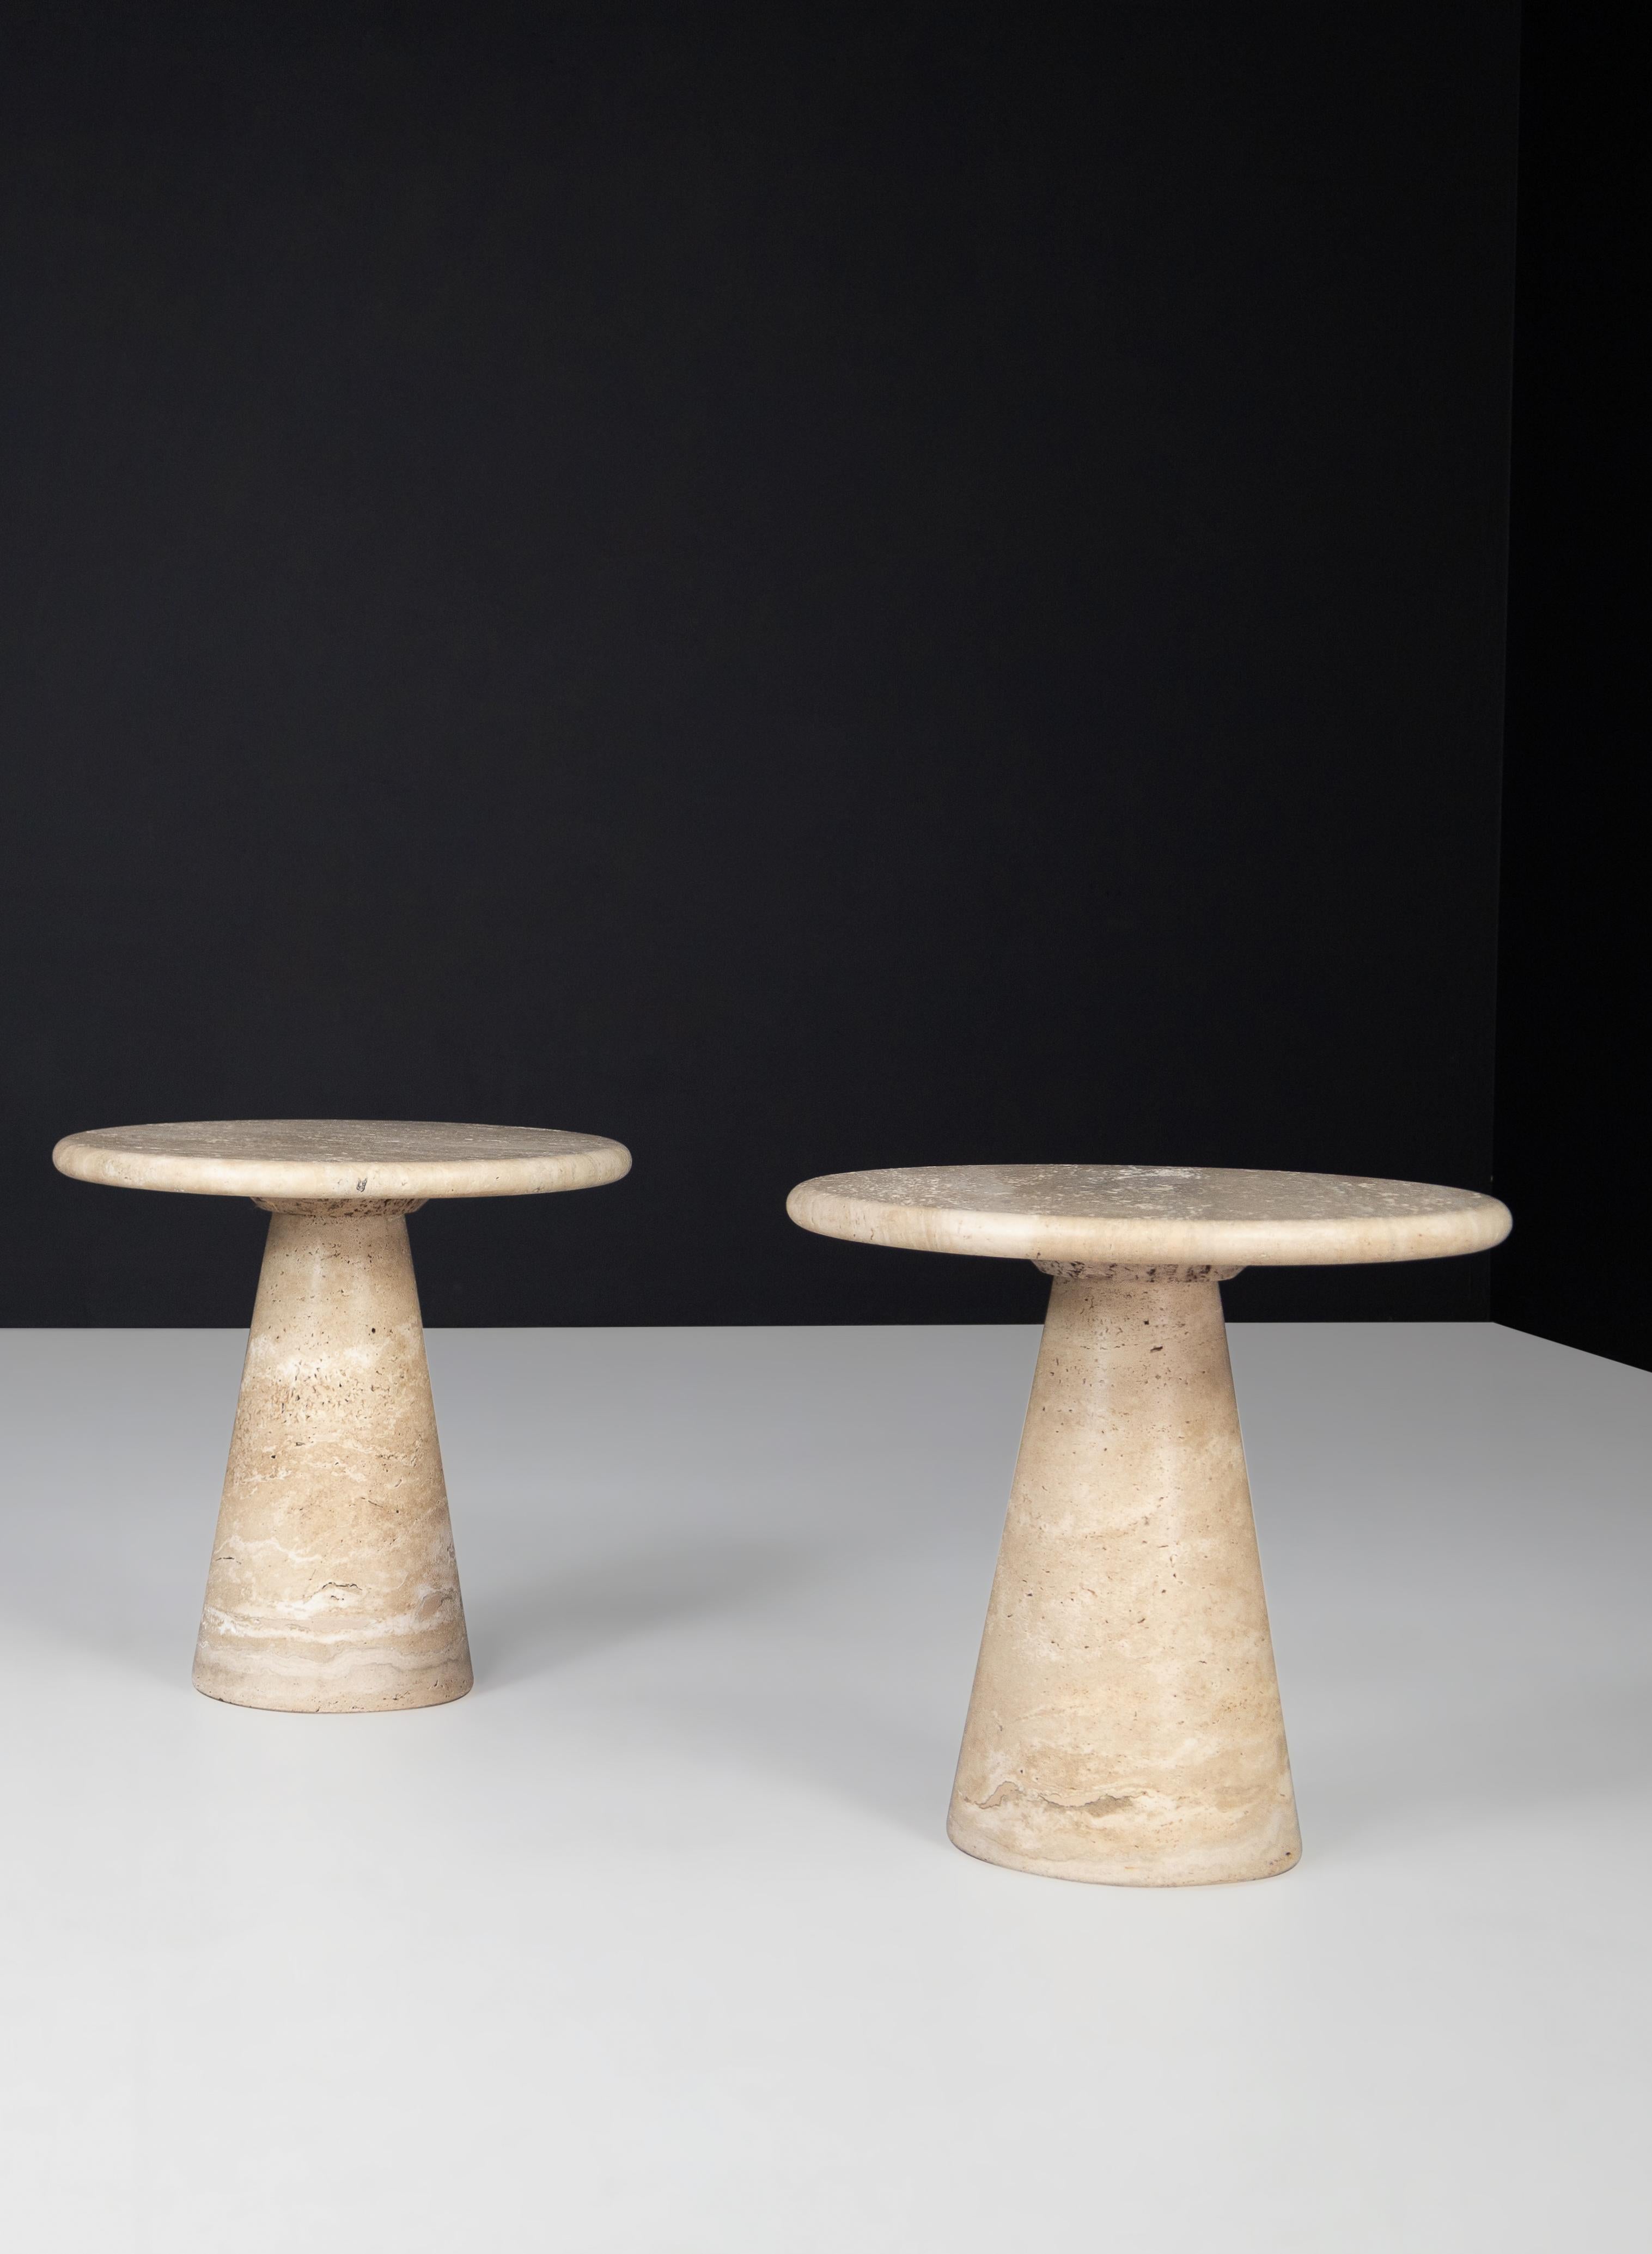  Travertine Circular Side Tables or Coffee Tables, Italy, 1980s  For Sale 11